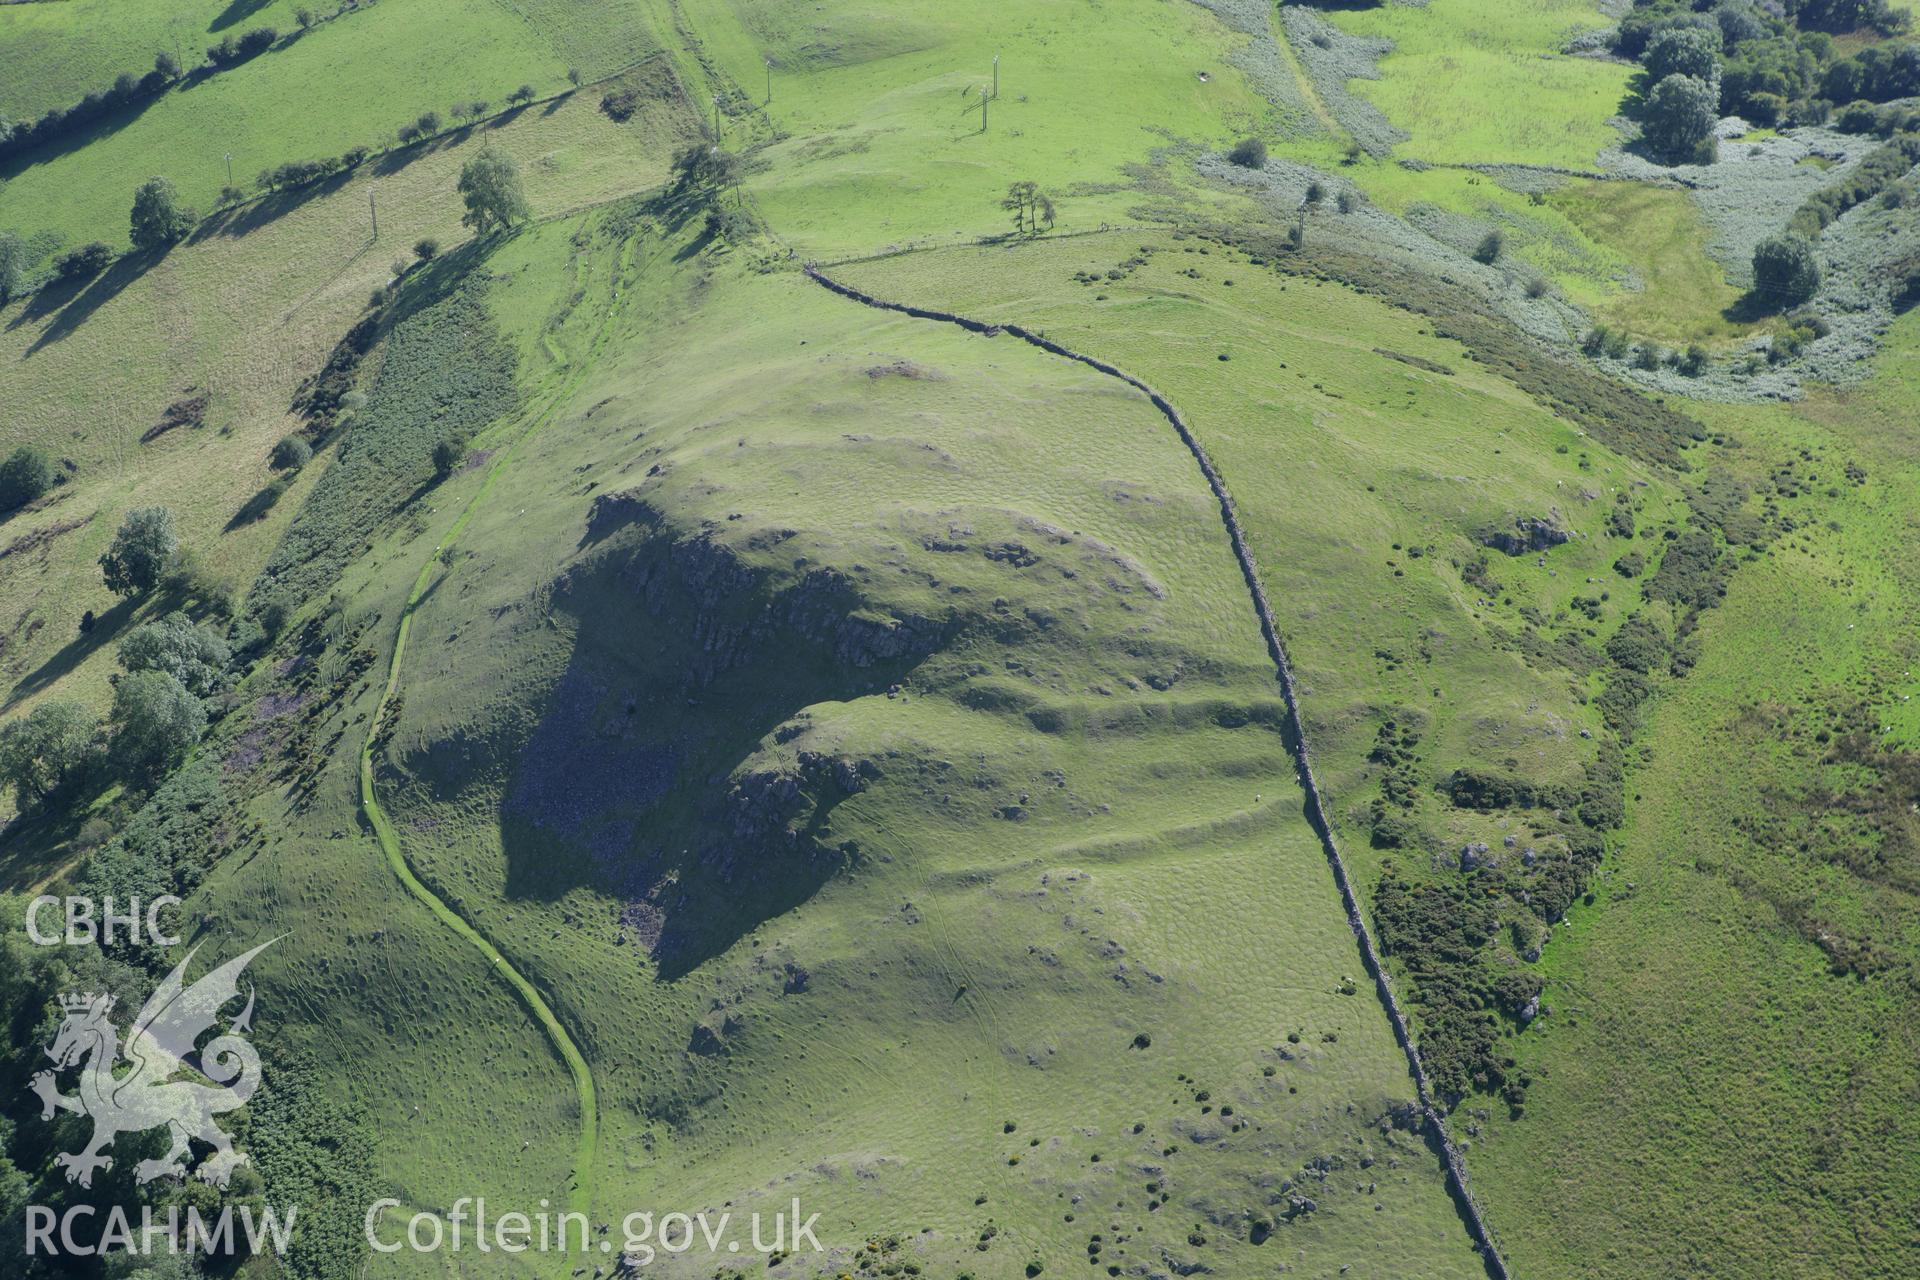 RCAHMW colour oblique aerial photograph of Gaer Fawr. Taken on 08 August 2007 by Toby Driver